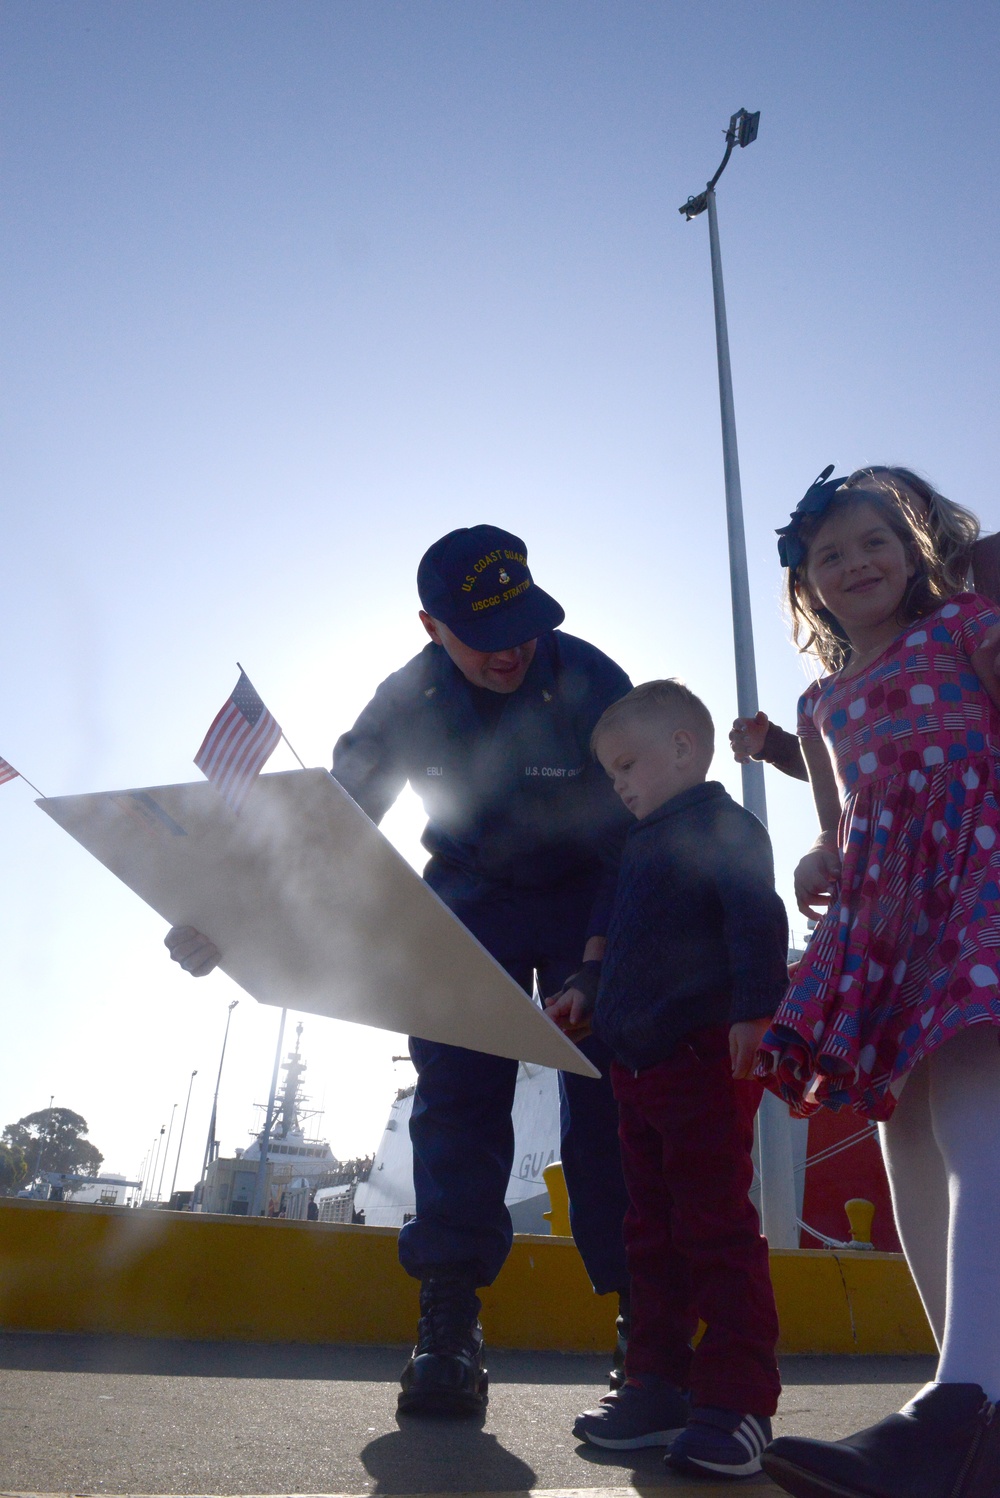 Crew of the U.S. Coast Guard Cutter Stratton return home following 162-day patrol in the Western Pacific